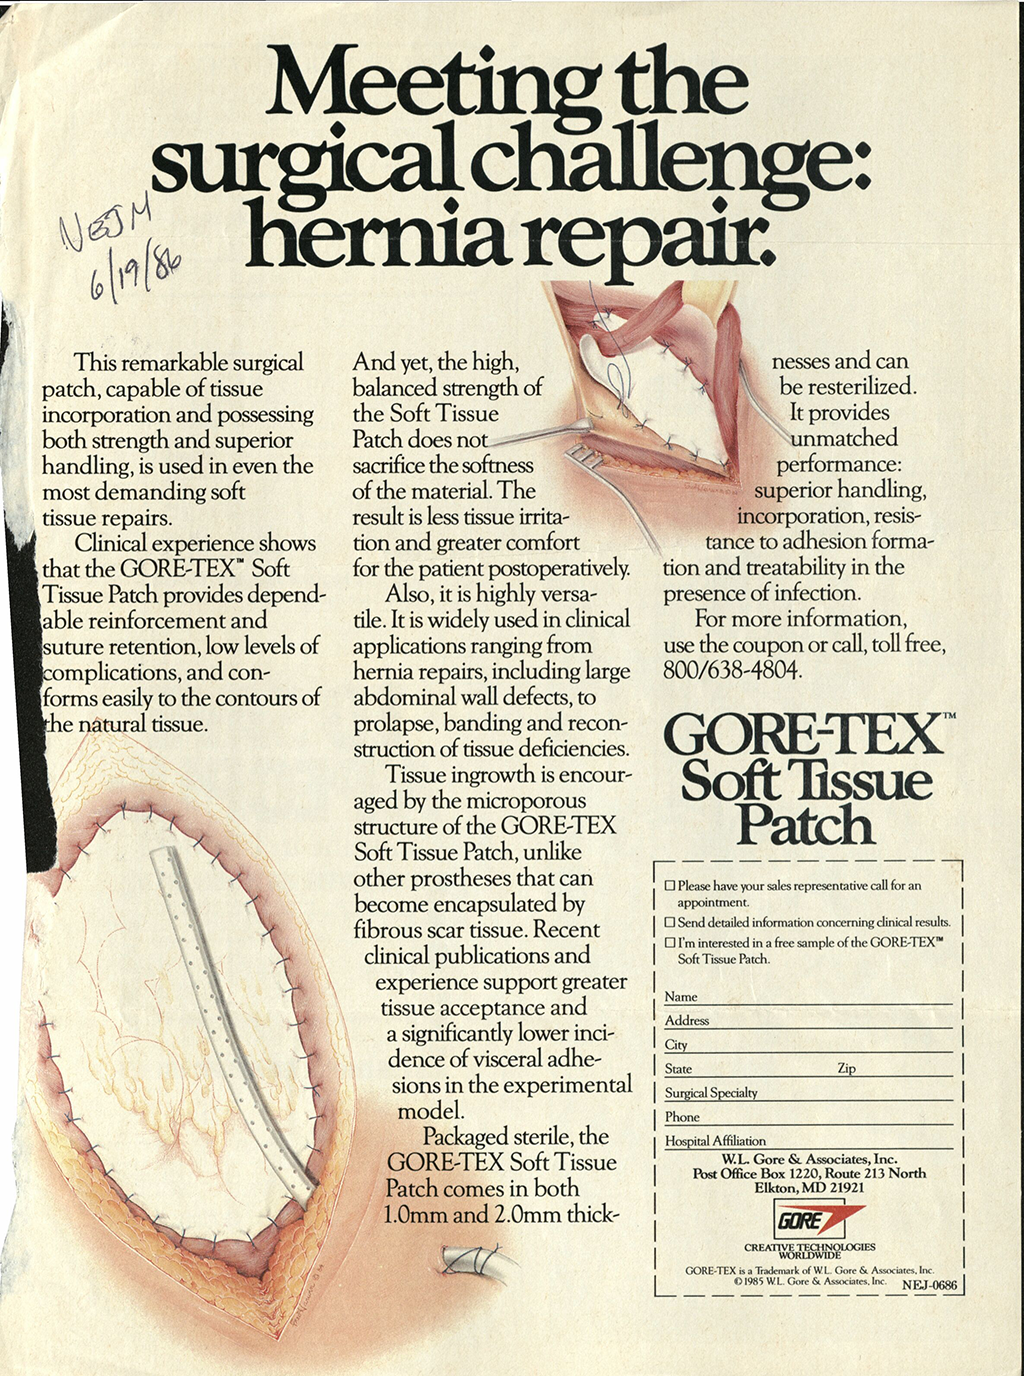 Gore-Tex advertisement for the Soft Tissue Patch. 